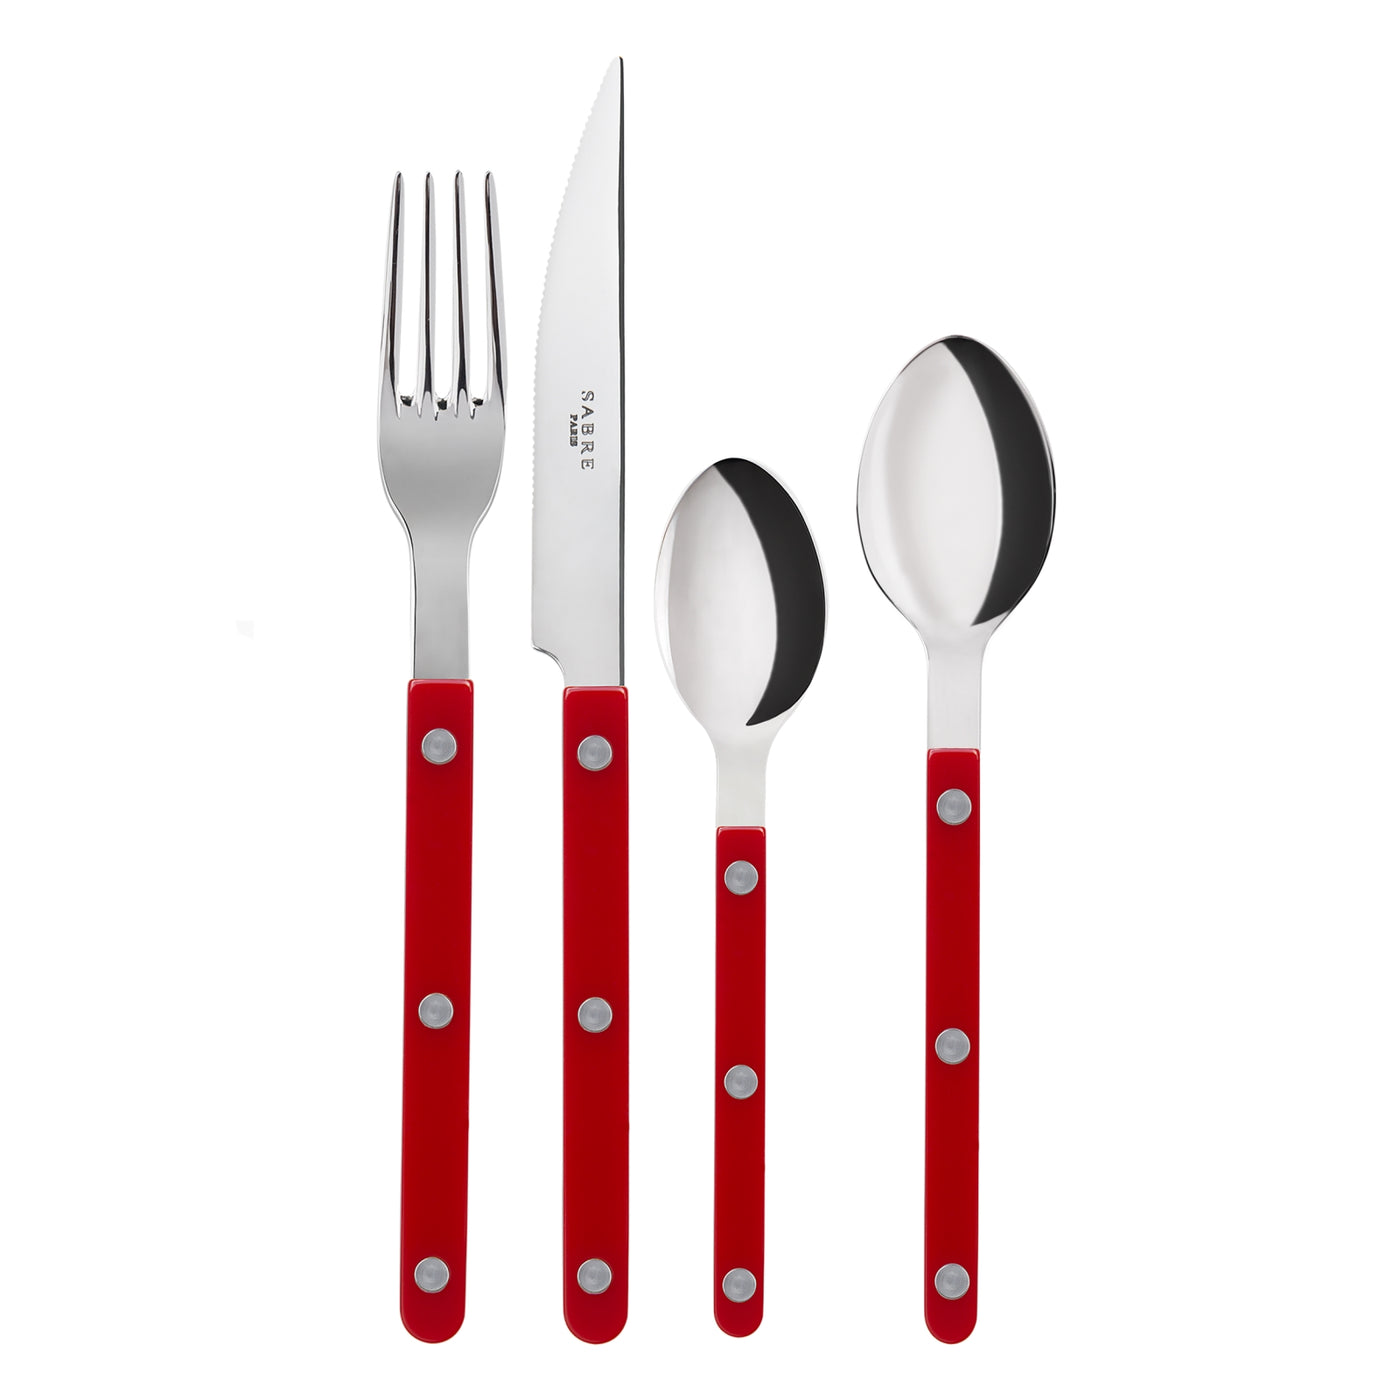 Bistrot shiny solid 4 pieces set - Burgundy